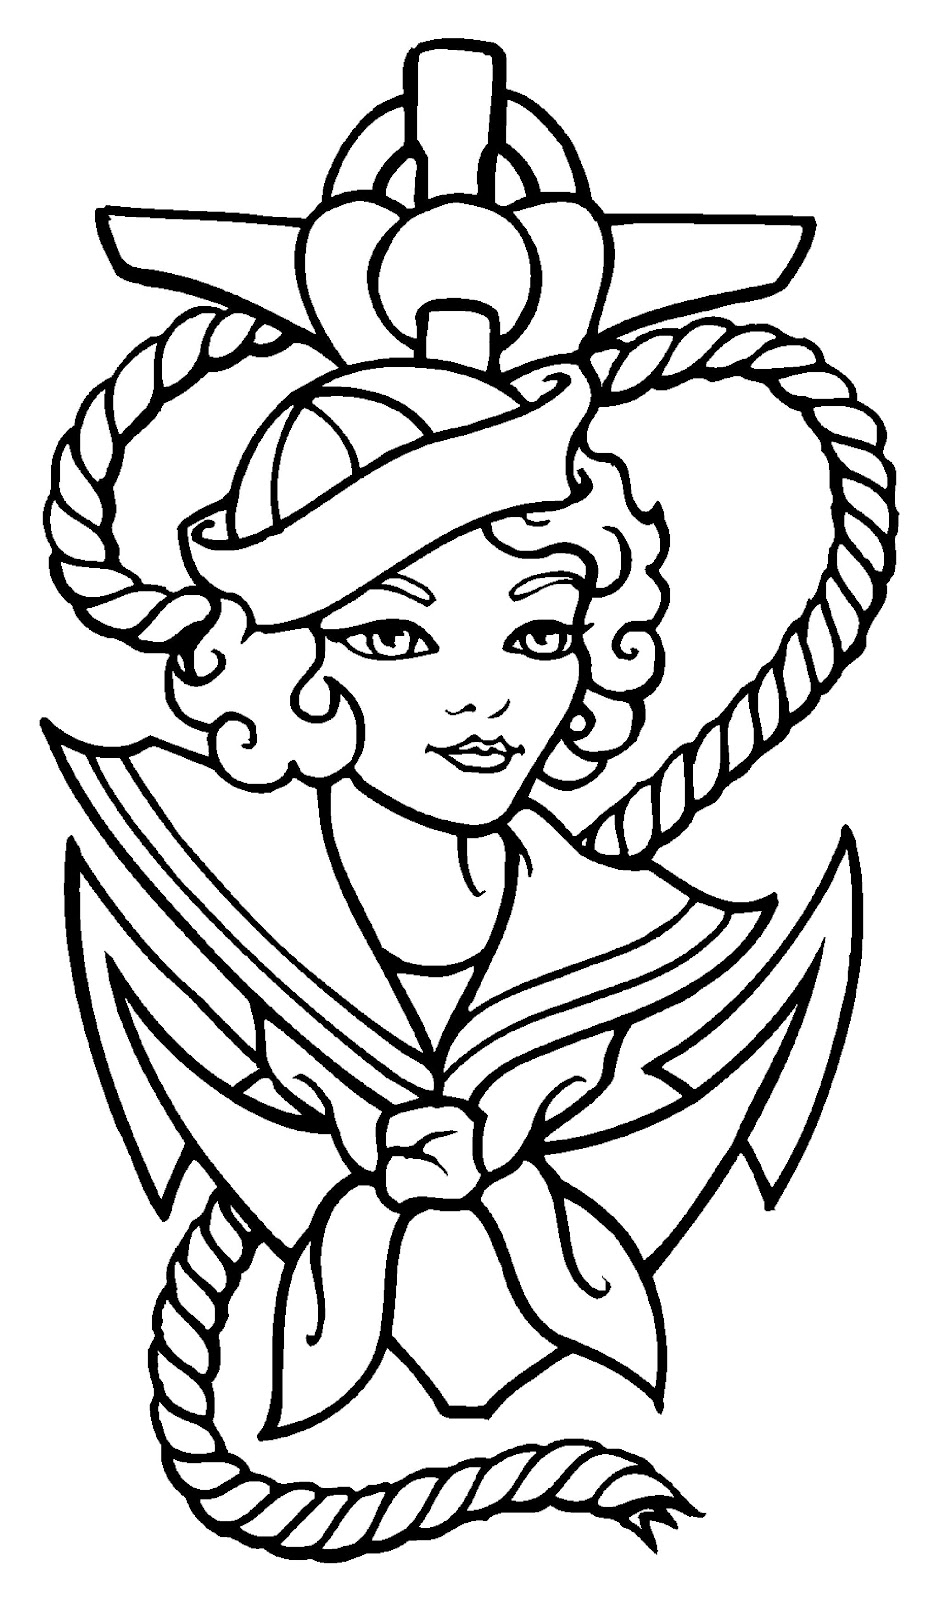 Tattoo drawings free clipart